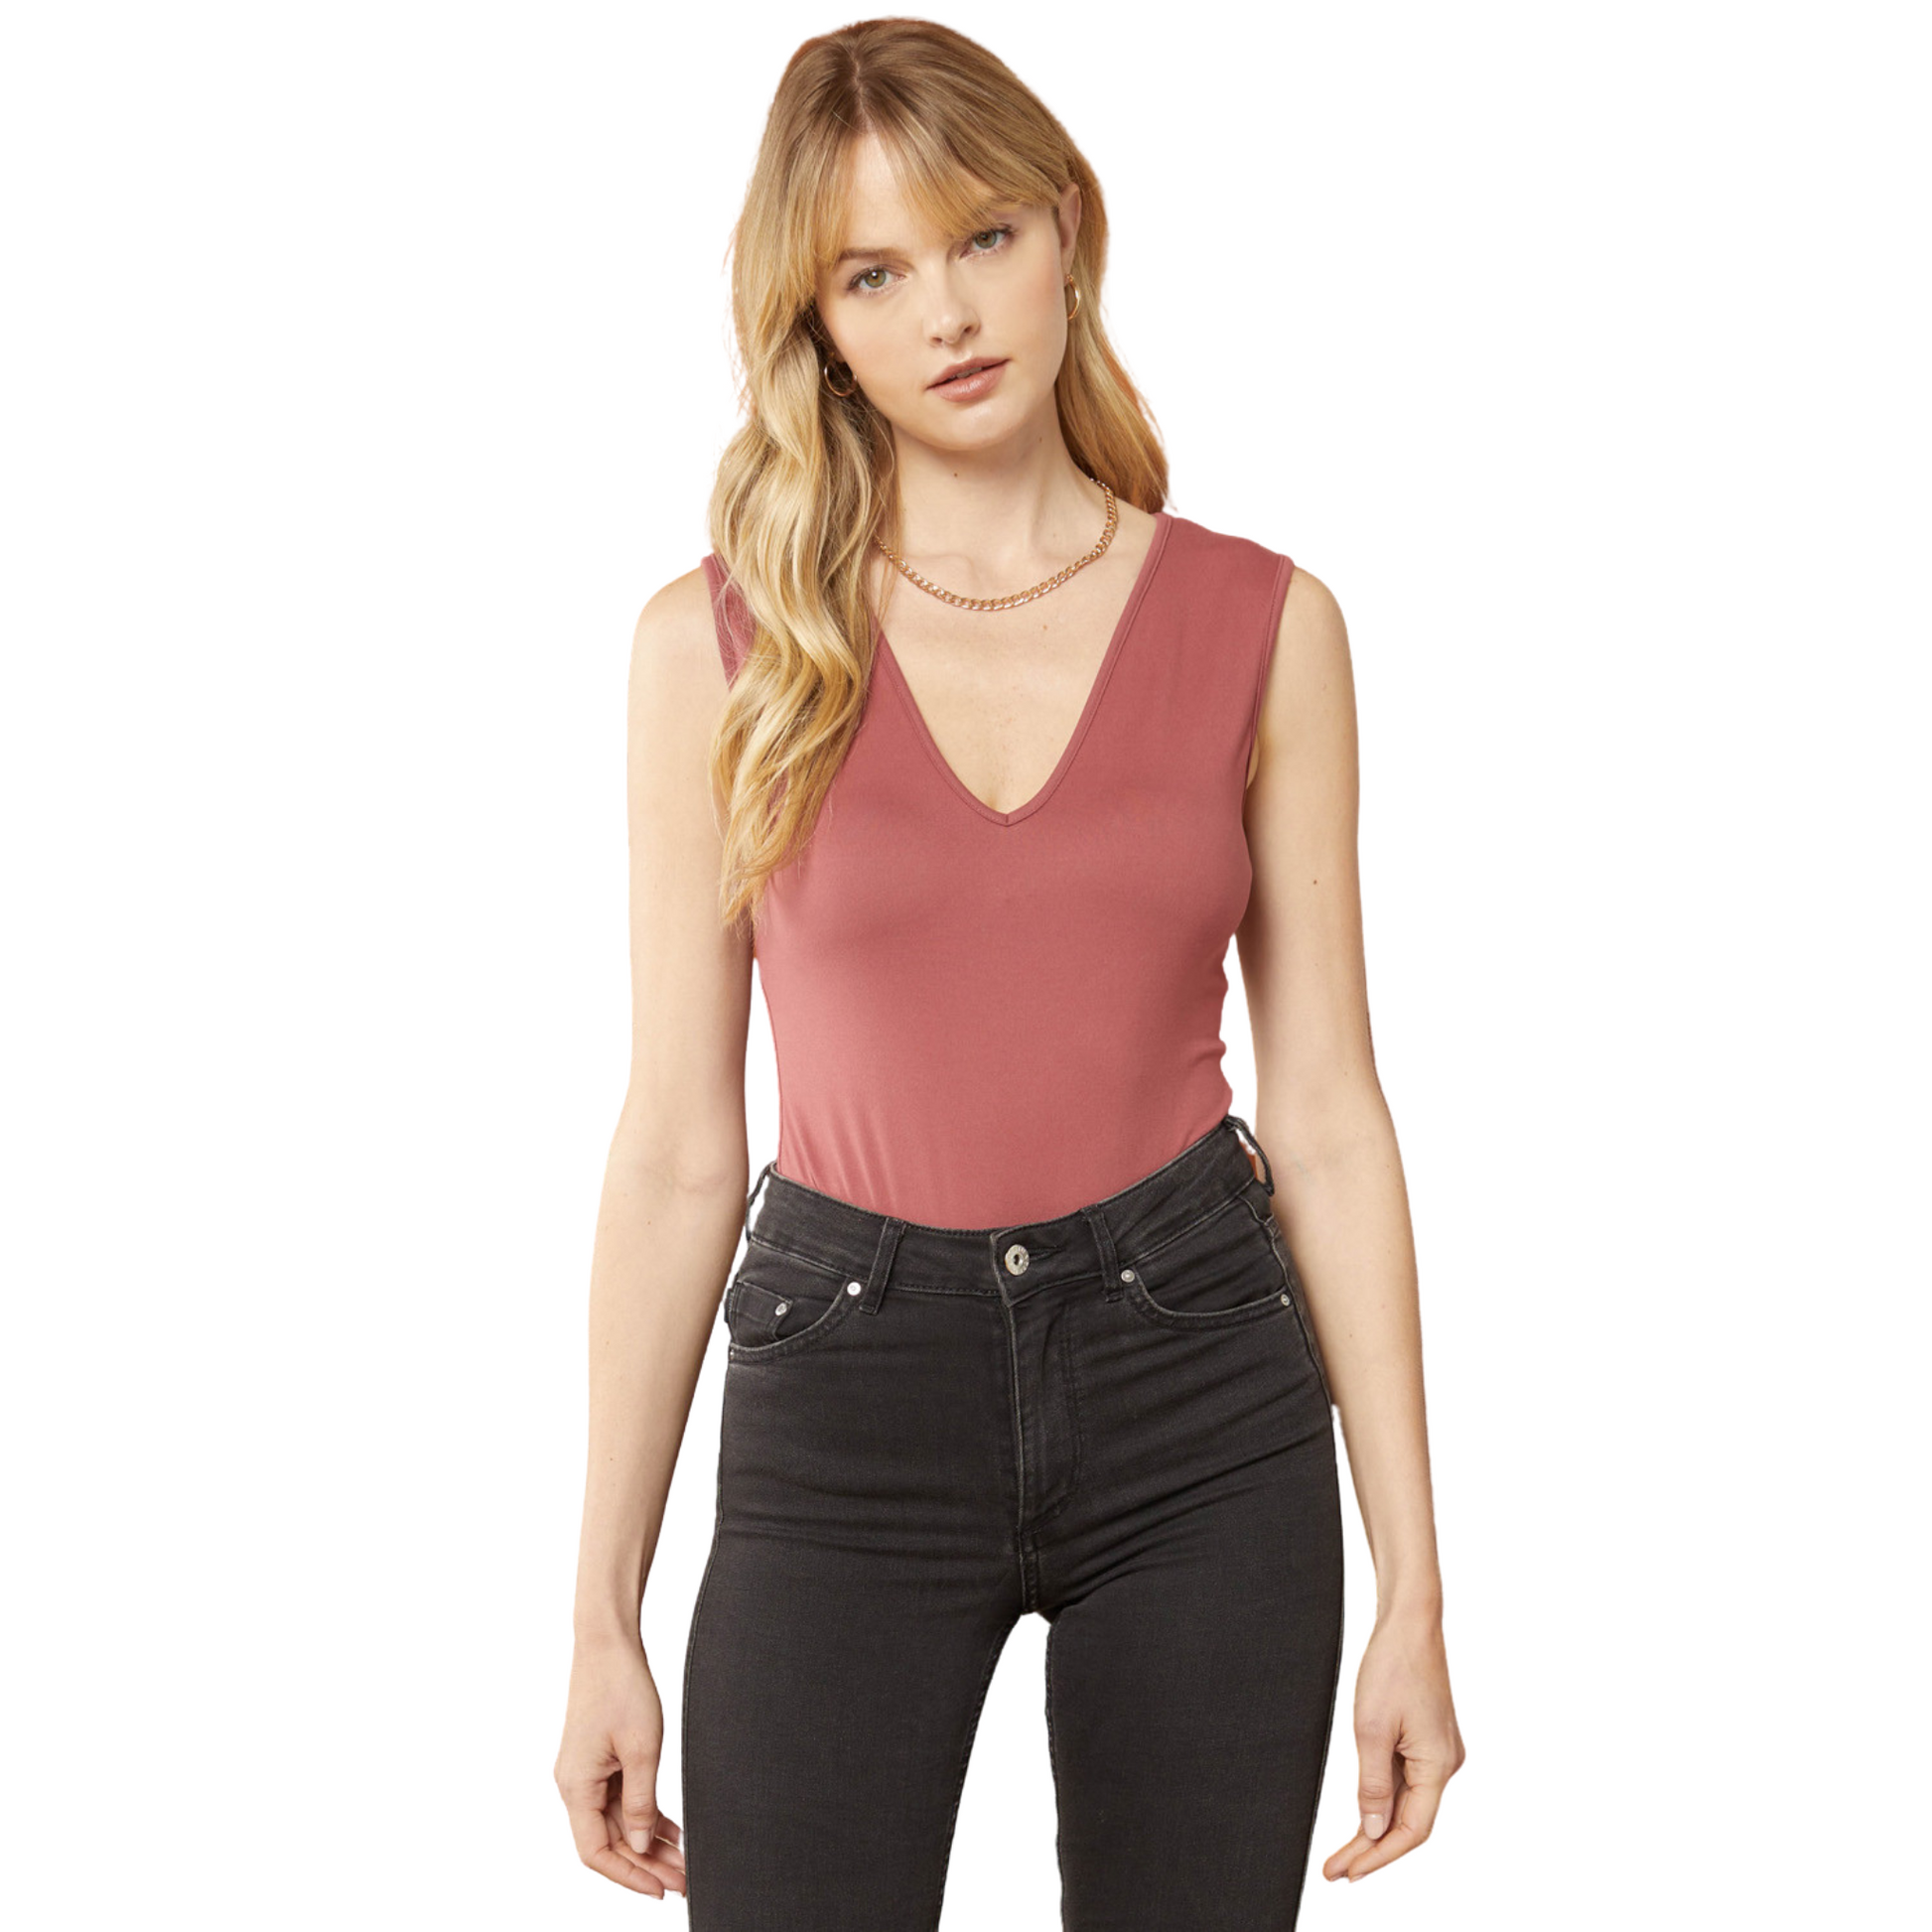 Flaunt your figure in this form-fitting V-Neck Sleeveless Bodysuit. Crafted from a comfortable yet durable material, the tank top features a stunning marsala color and a flattering v neckline. Get a classic and timeless look with this stylish, must-have piece.